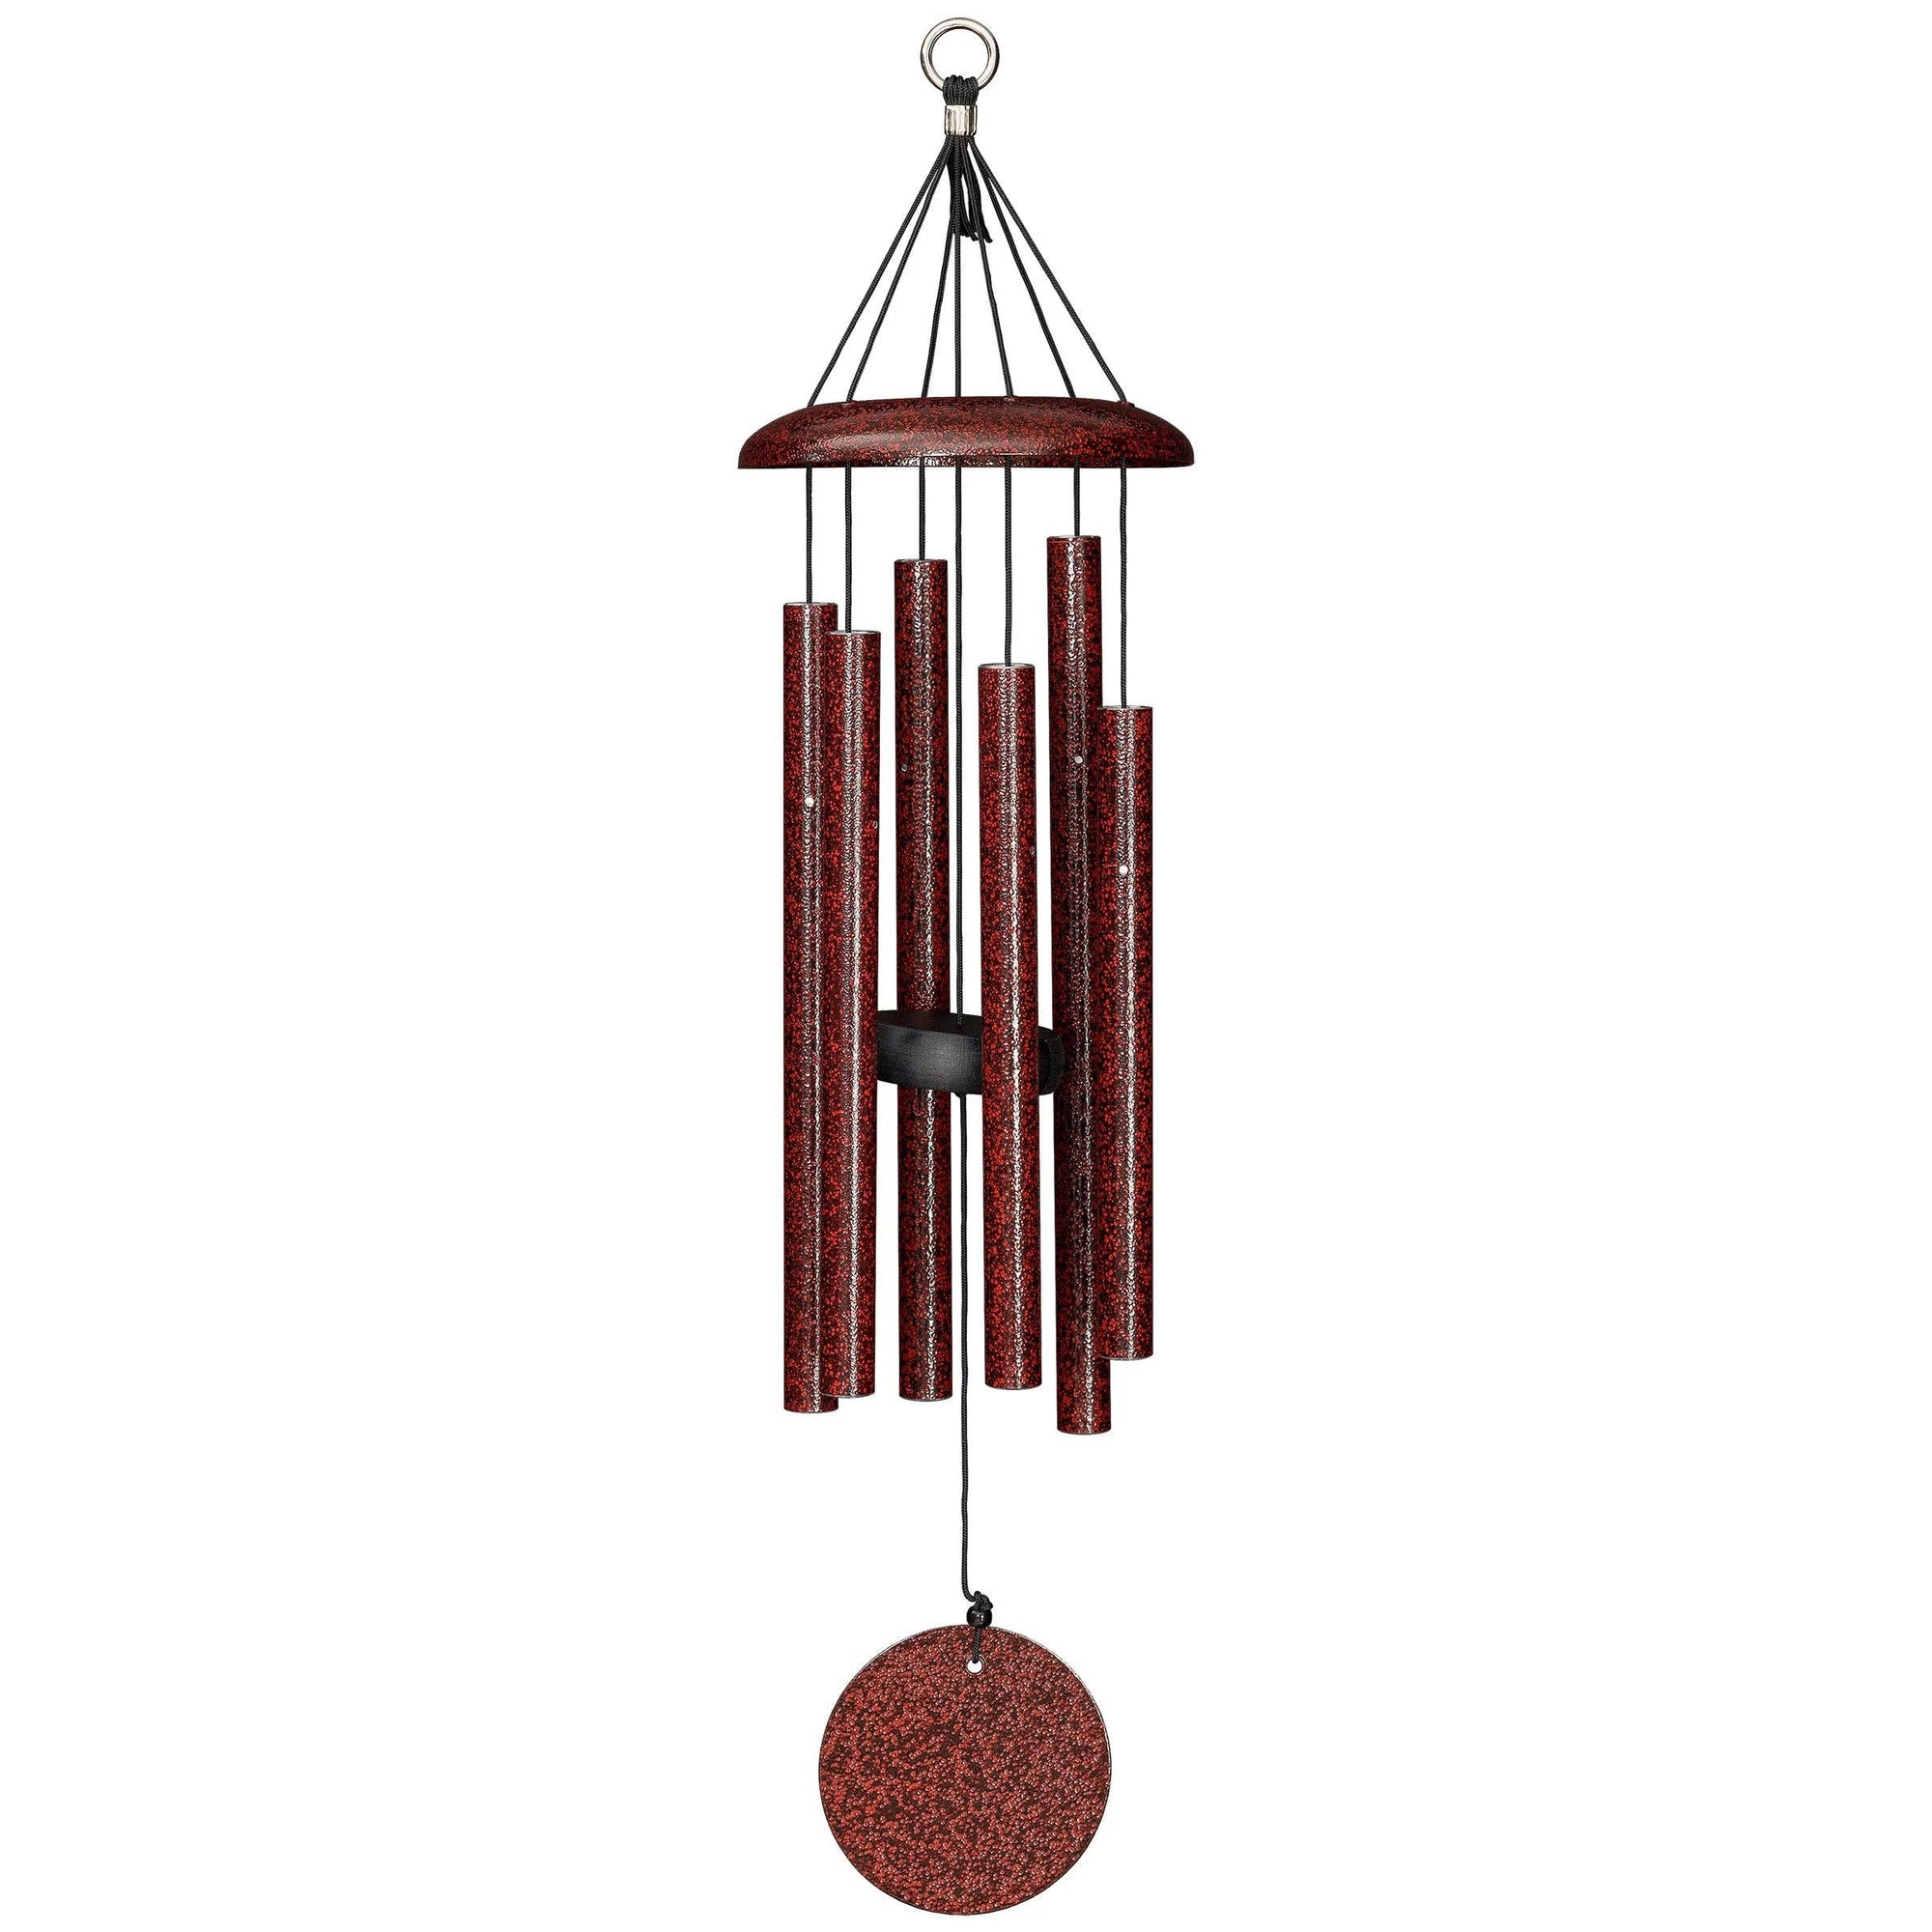 A 27" Windchime Corinthian Bells® adds a touch of decor to the white background.